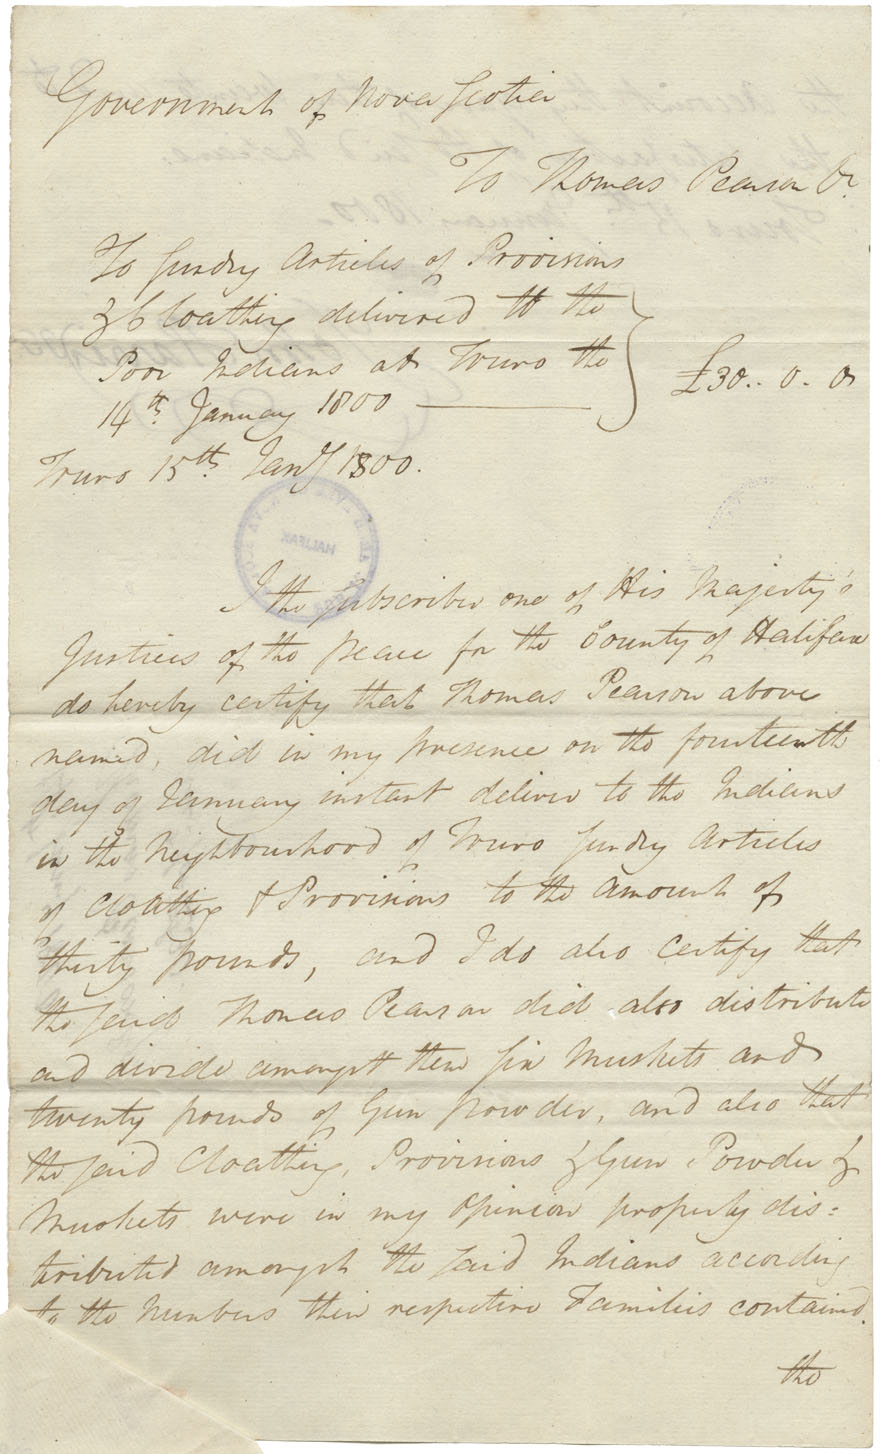 Amount of provisions and clothing supplied the under mentioned Mi'kmaq family, at Truro, by Thomas Pearson, 14 January 1800. Corroborating letter from John Harris, J.P. 